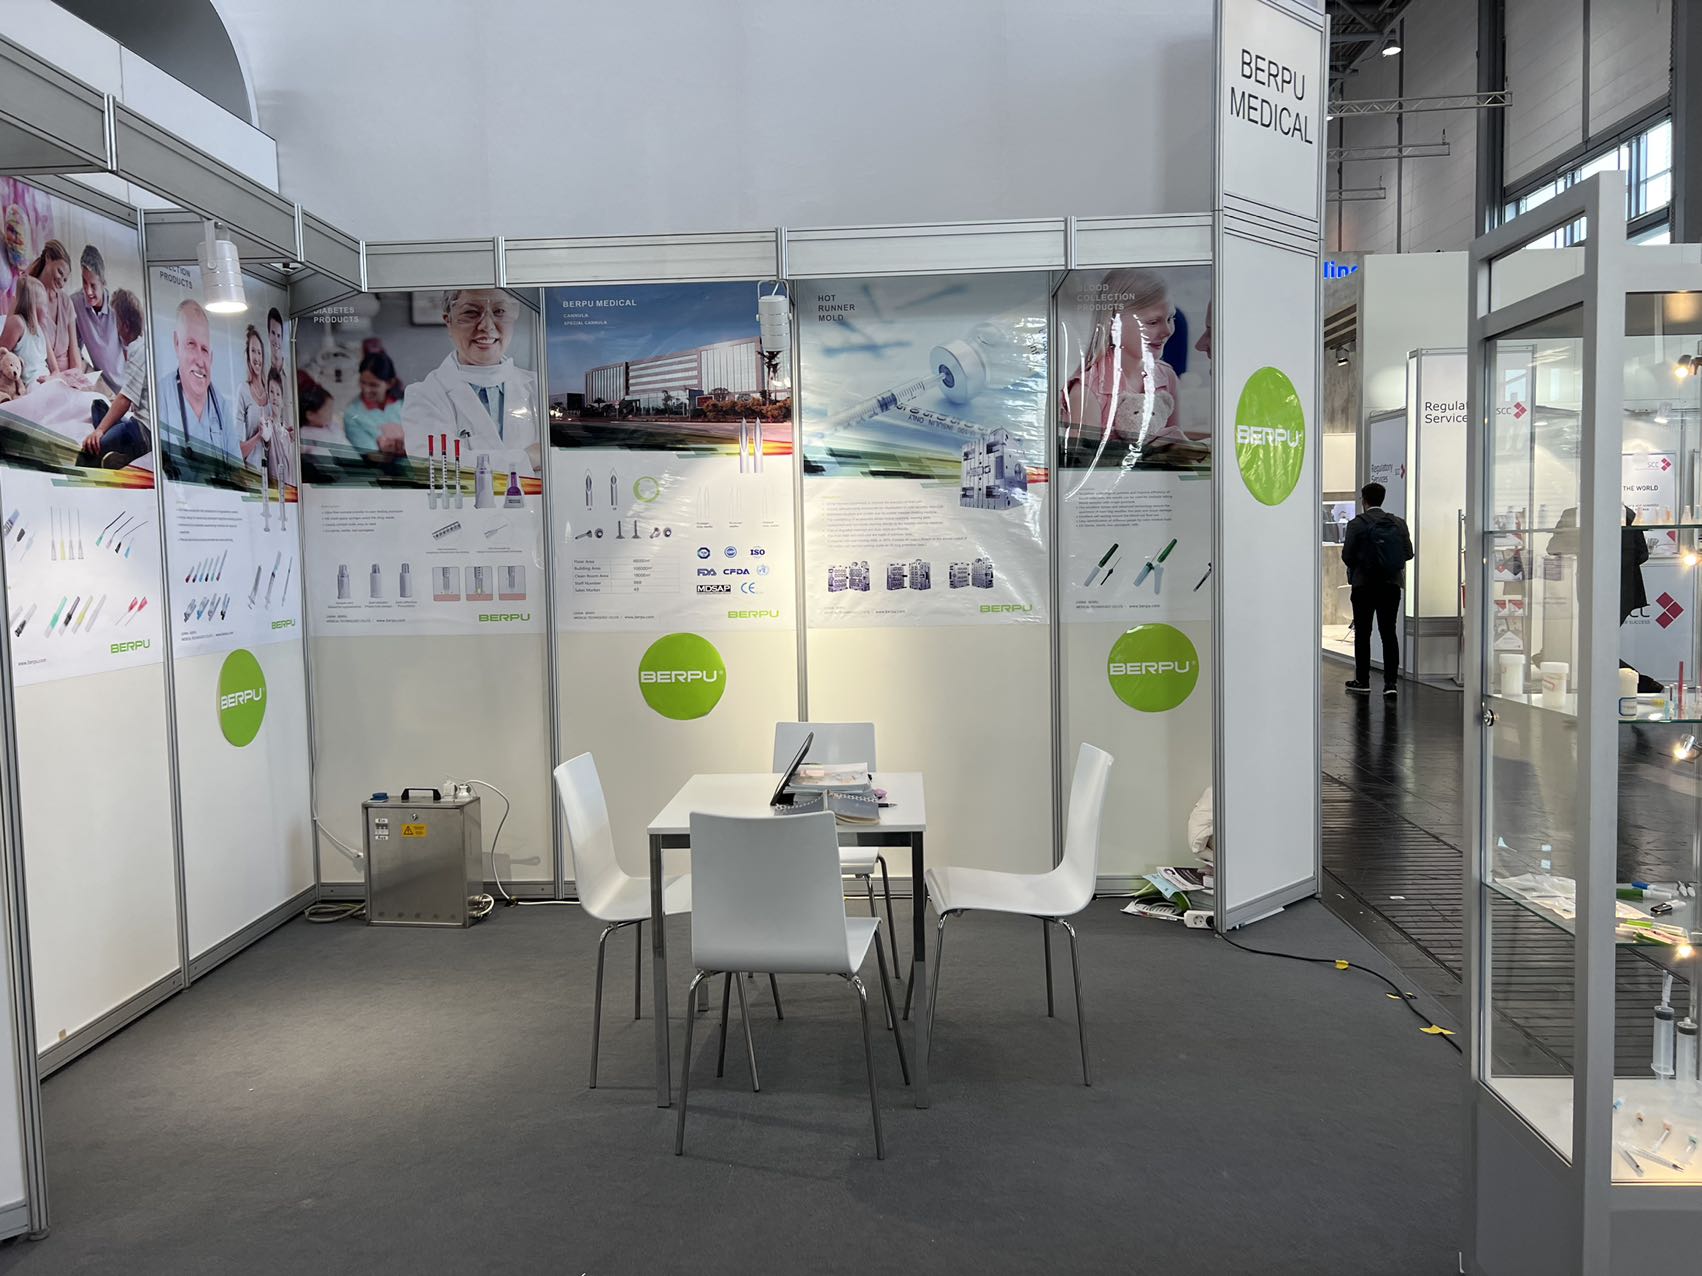 BERPU attended MEDICA and COMPAMED Medical Exhibitionon at the Düsseldorf Germany